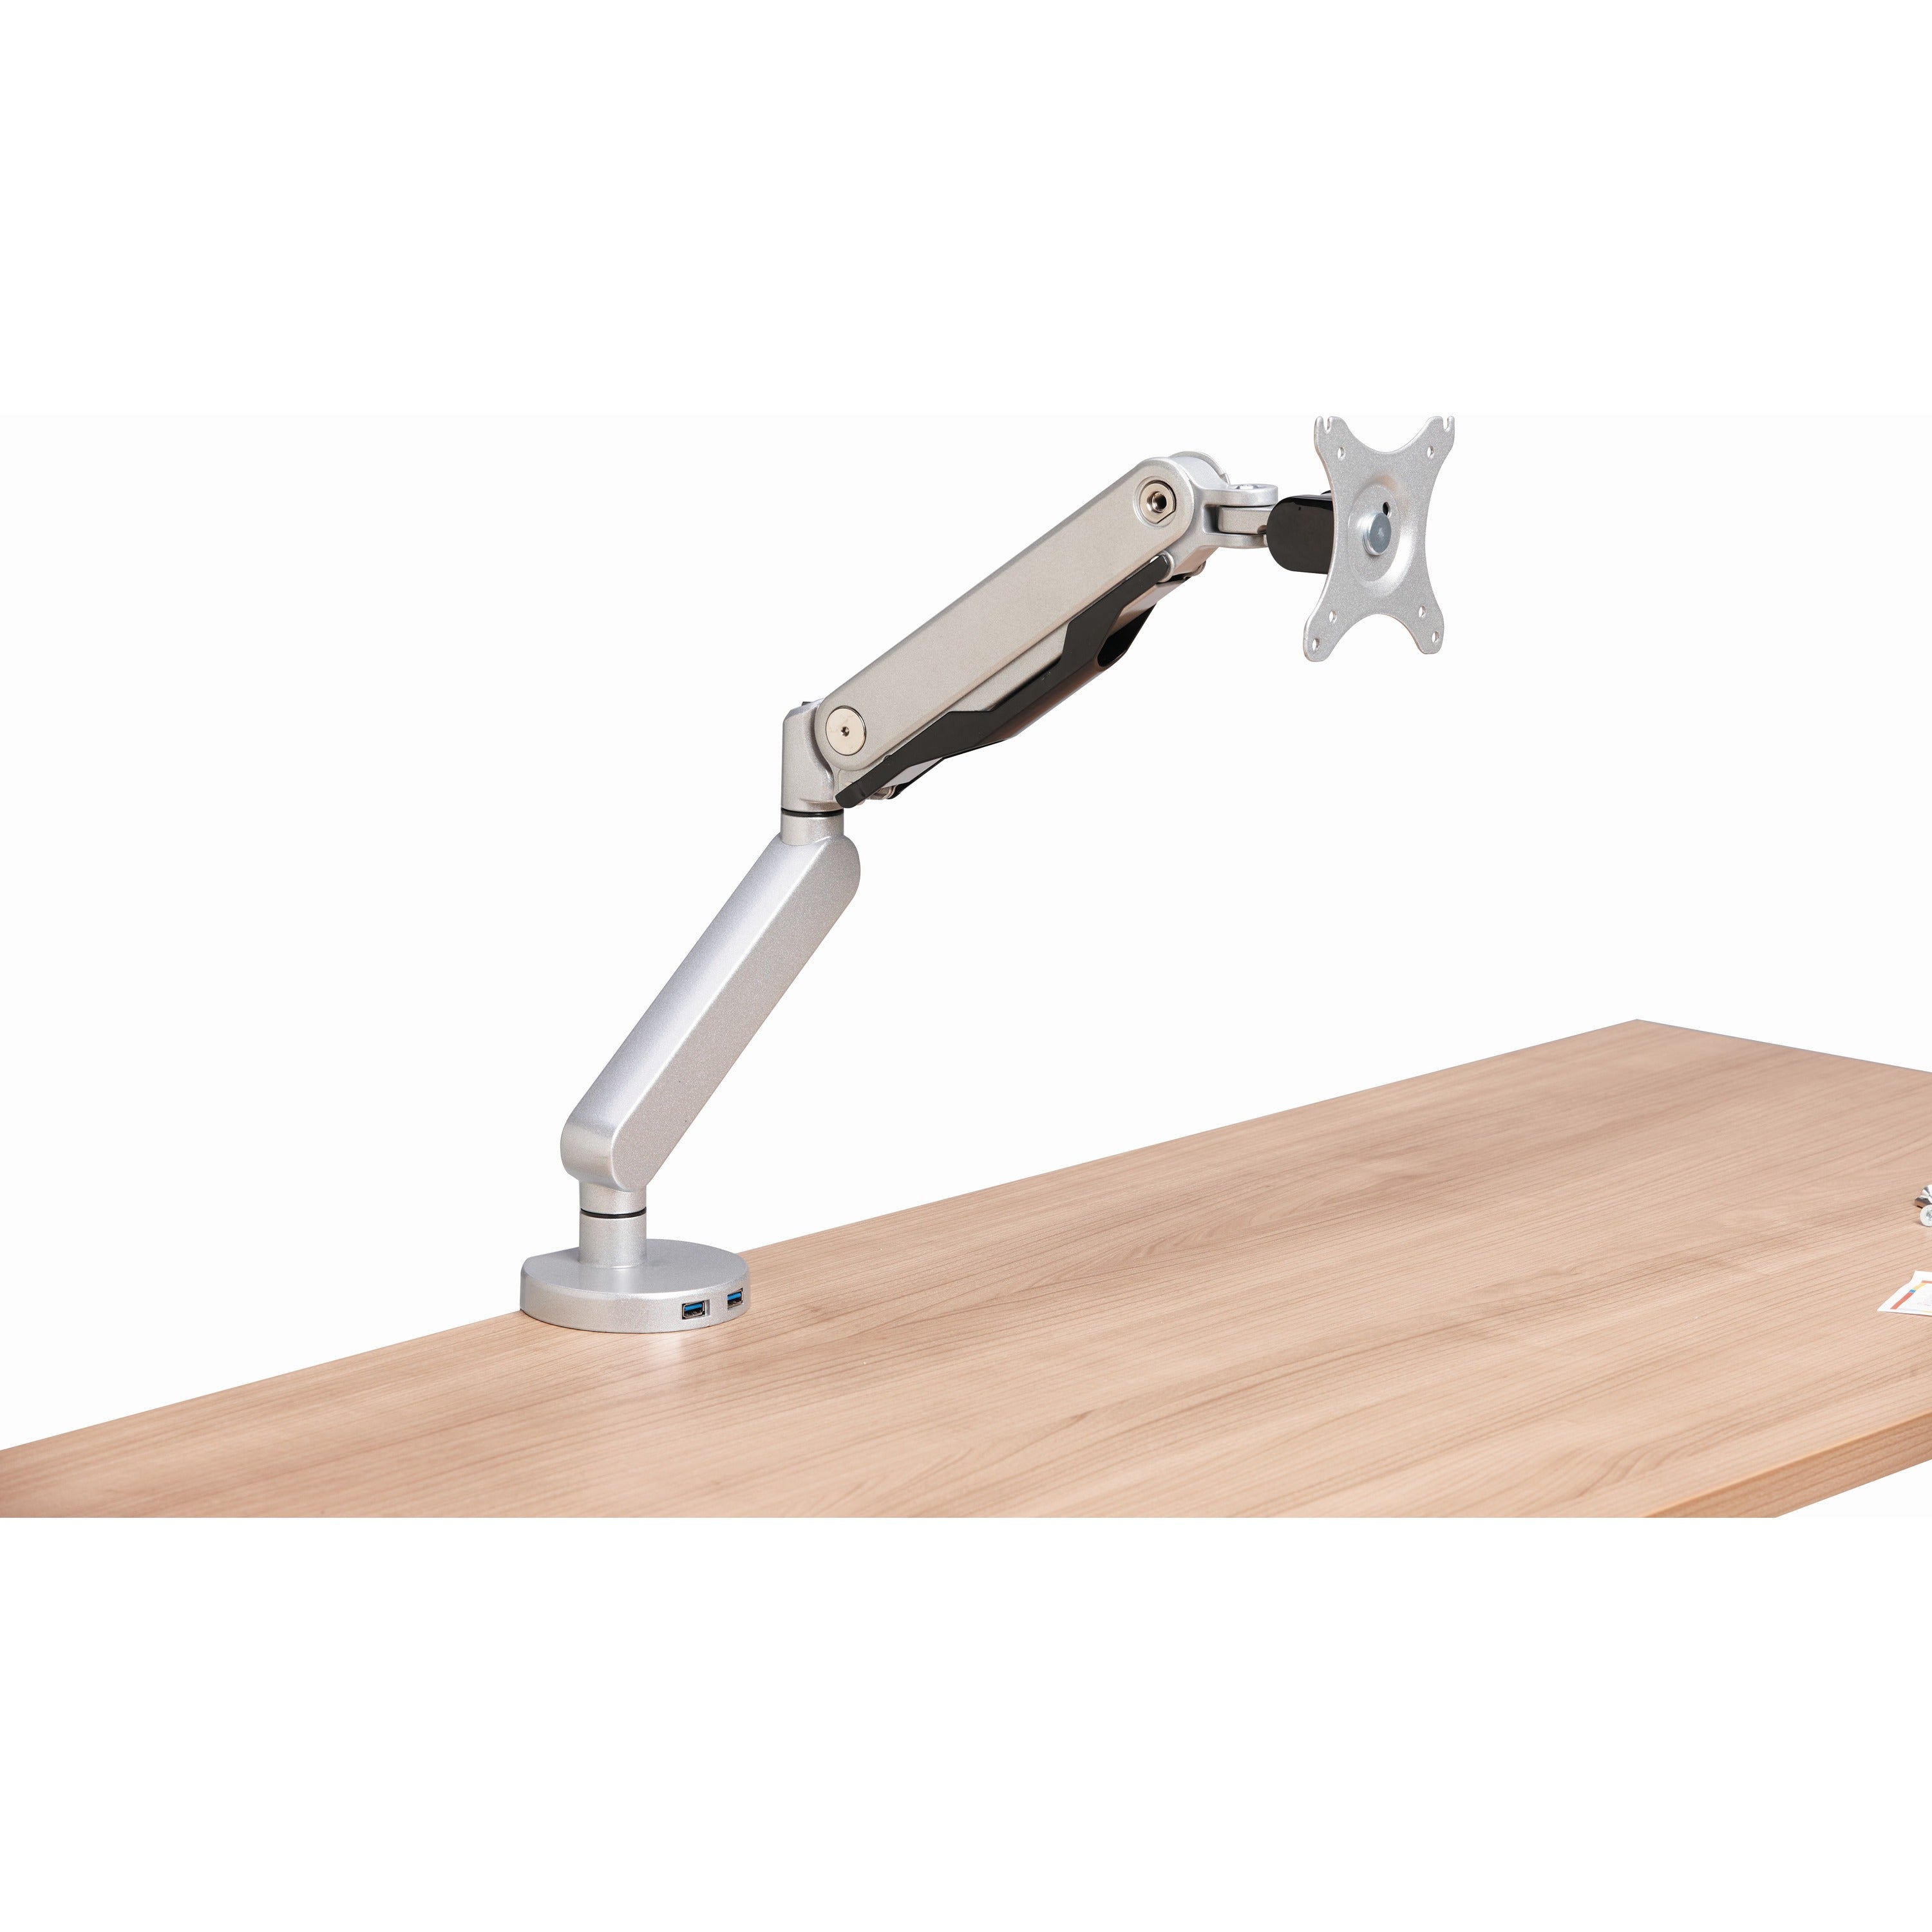 hon-hbsmausb-mounting-arm-for-monitor-silver-1-displays-supported_honbsmausb - 1